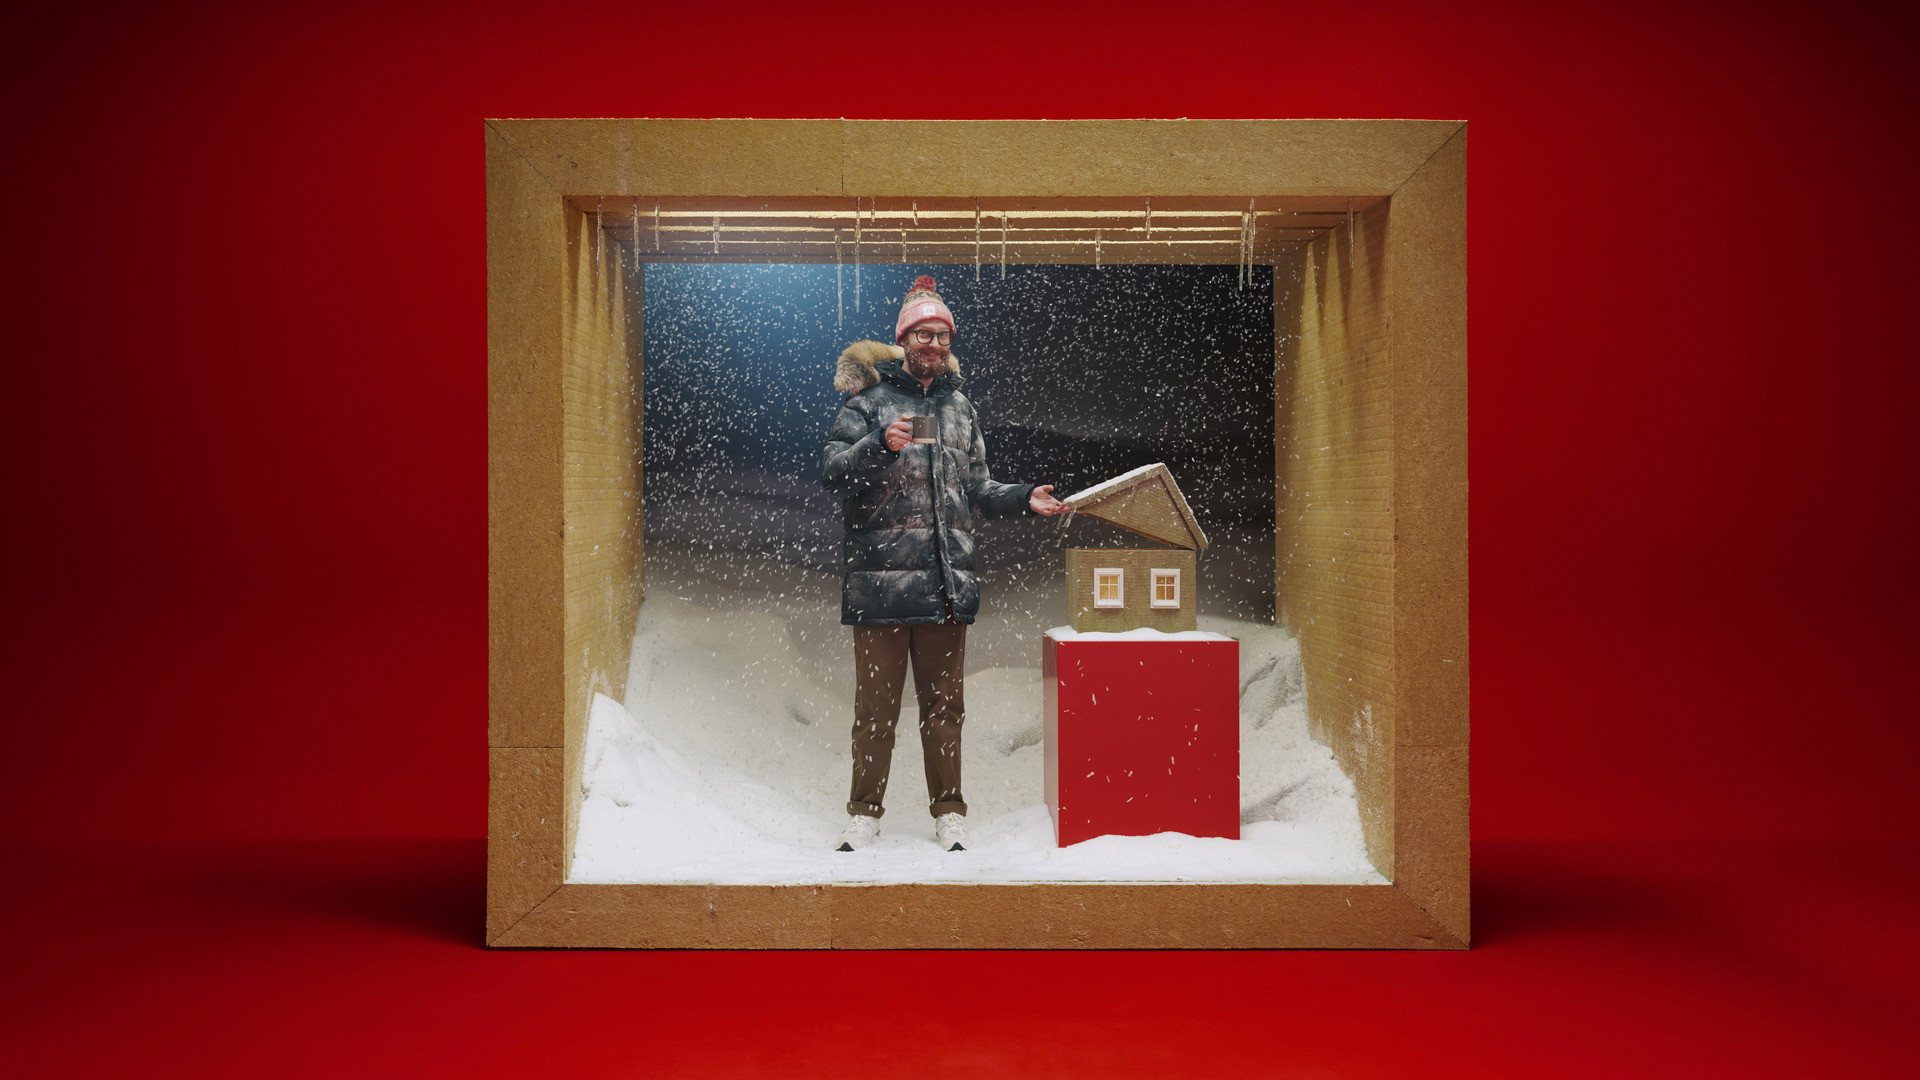 ROCKWOOL insulation is engineered to keep you comfortable inside whatever the weather is outside.

